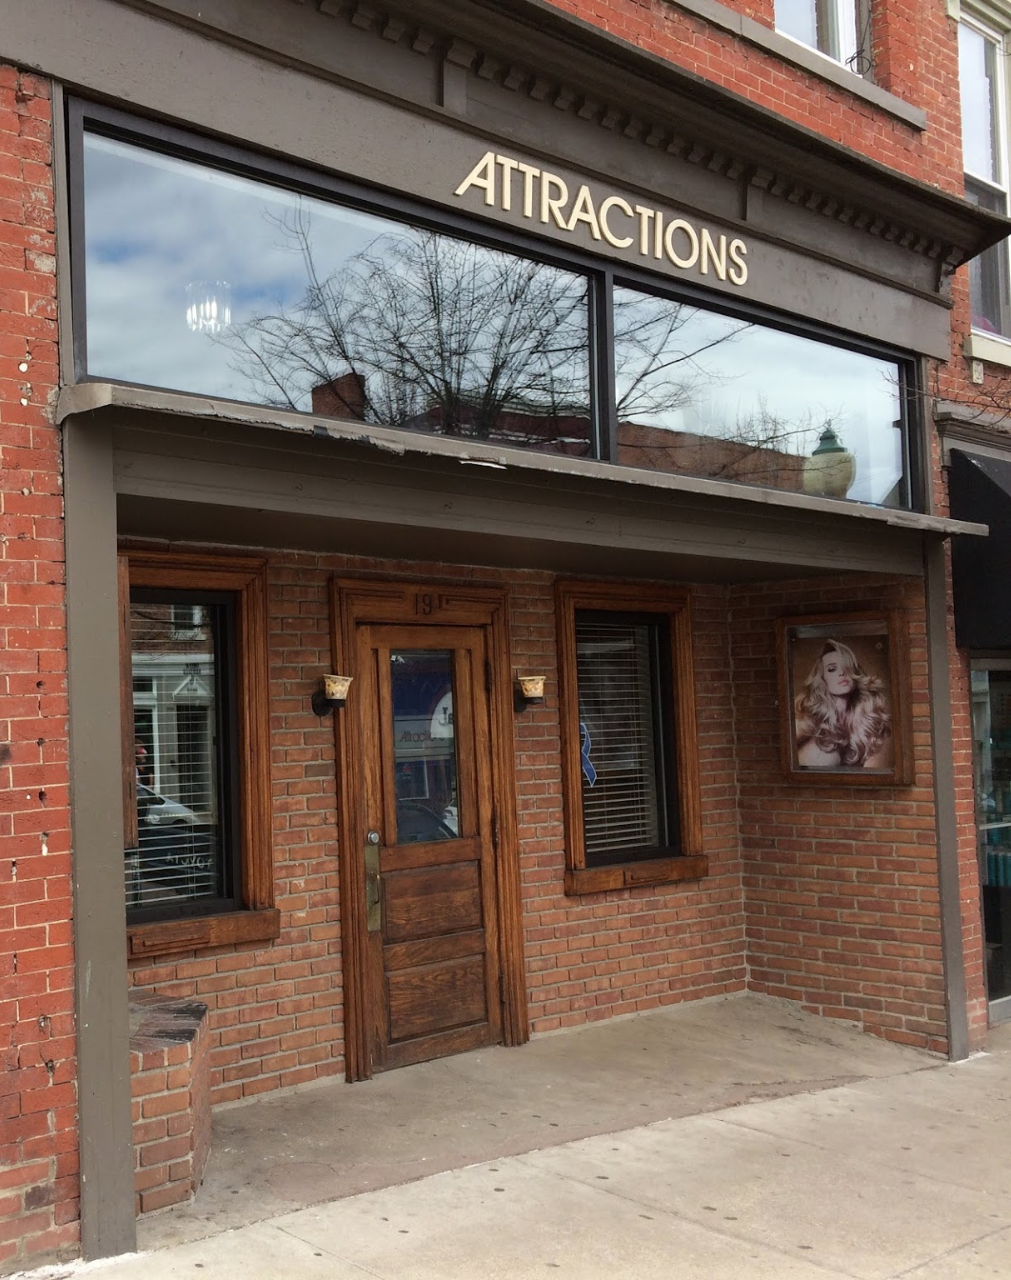 Attractions On Main Salon in Downtown Durango